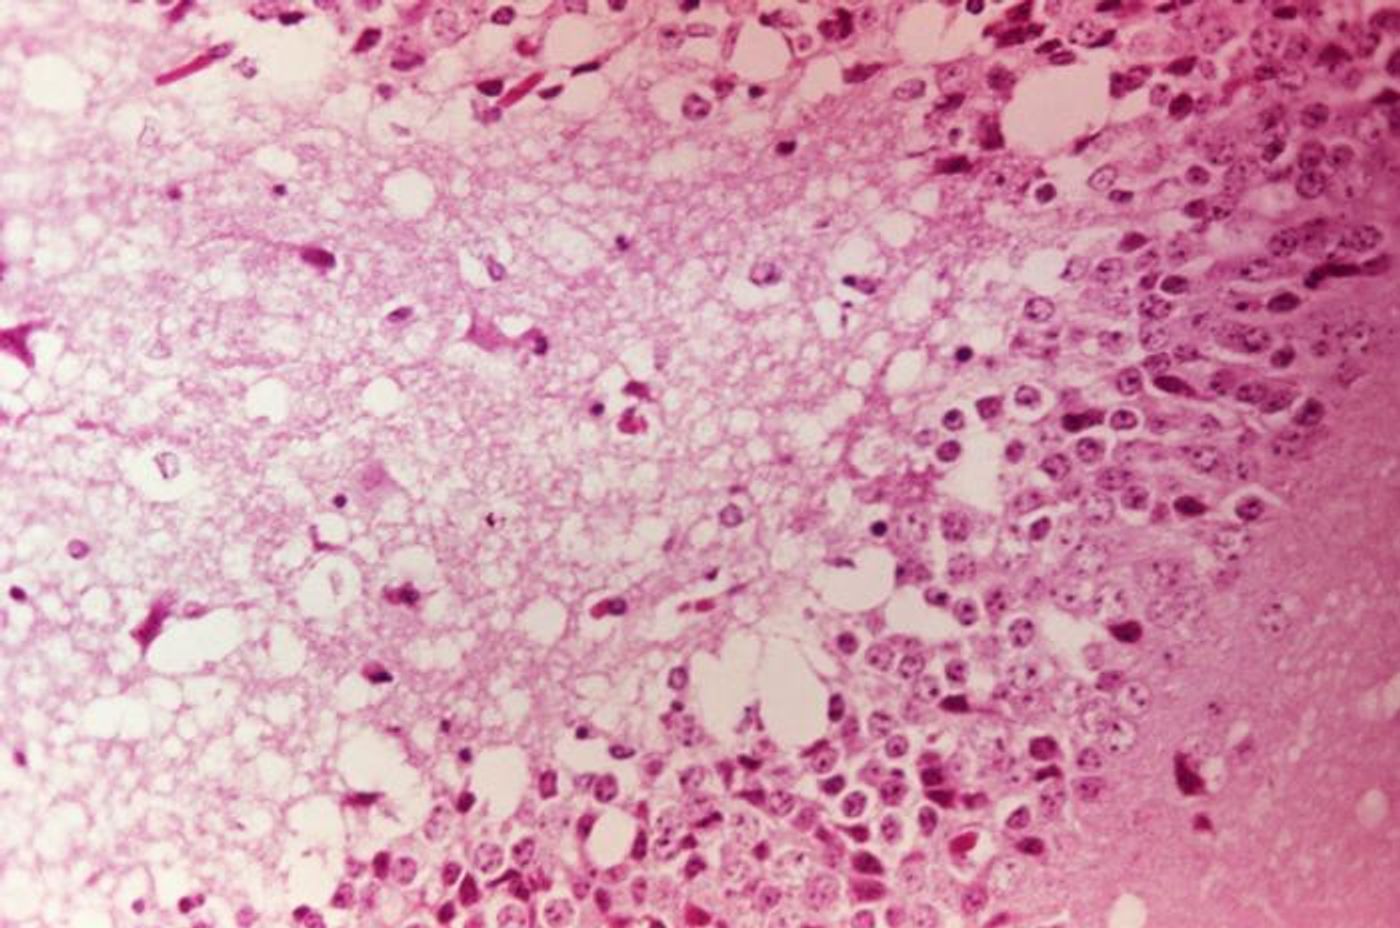 Photomicrograph of mouse brain tissue after dying of Venezuelan Encephalitis. Reveals neural necrosis and edema. /Credit: CDC's Public Health Image Library (PHIL)